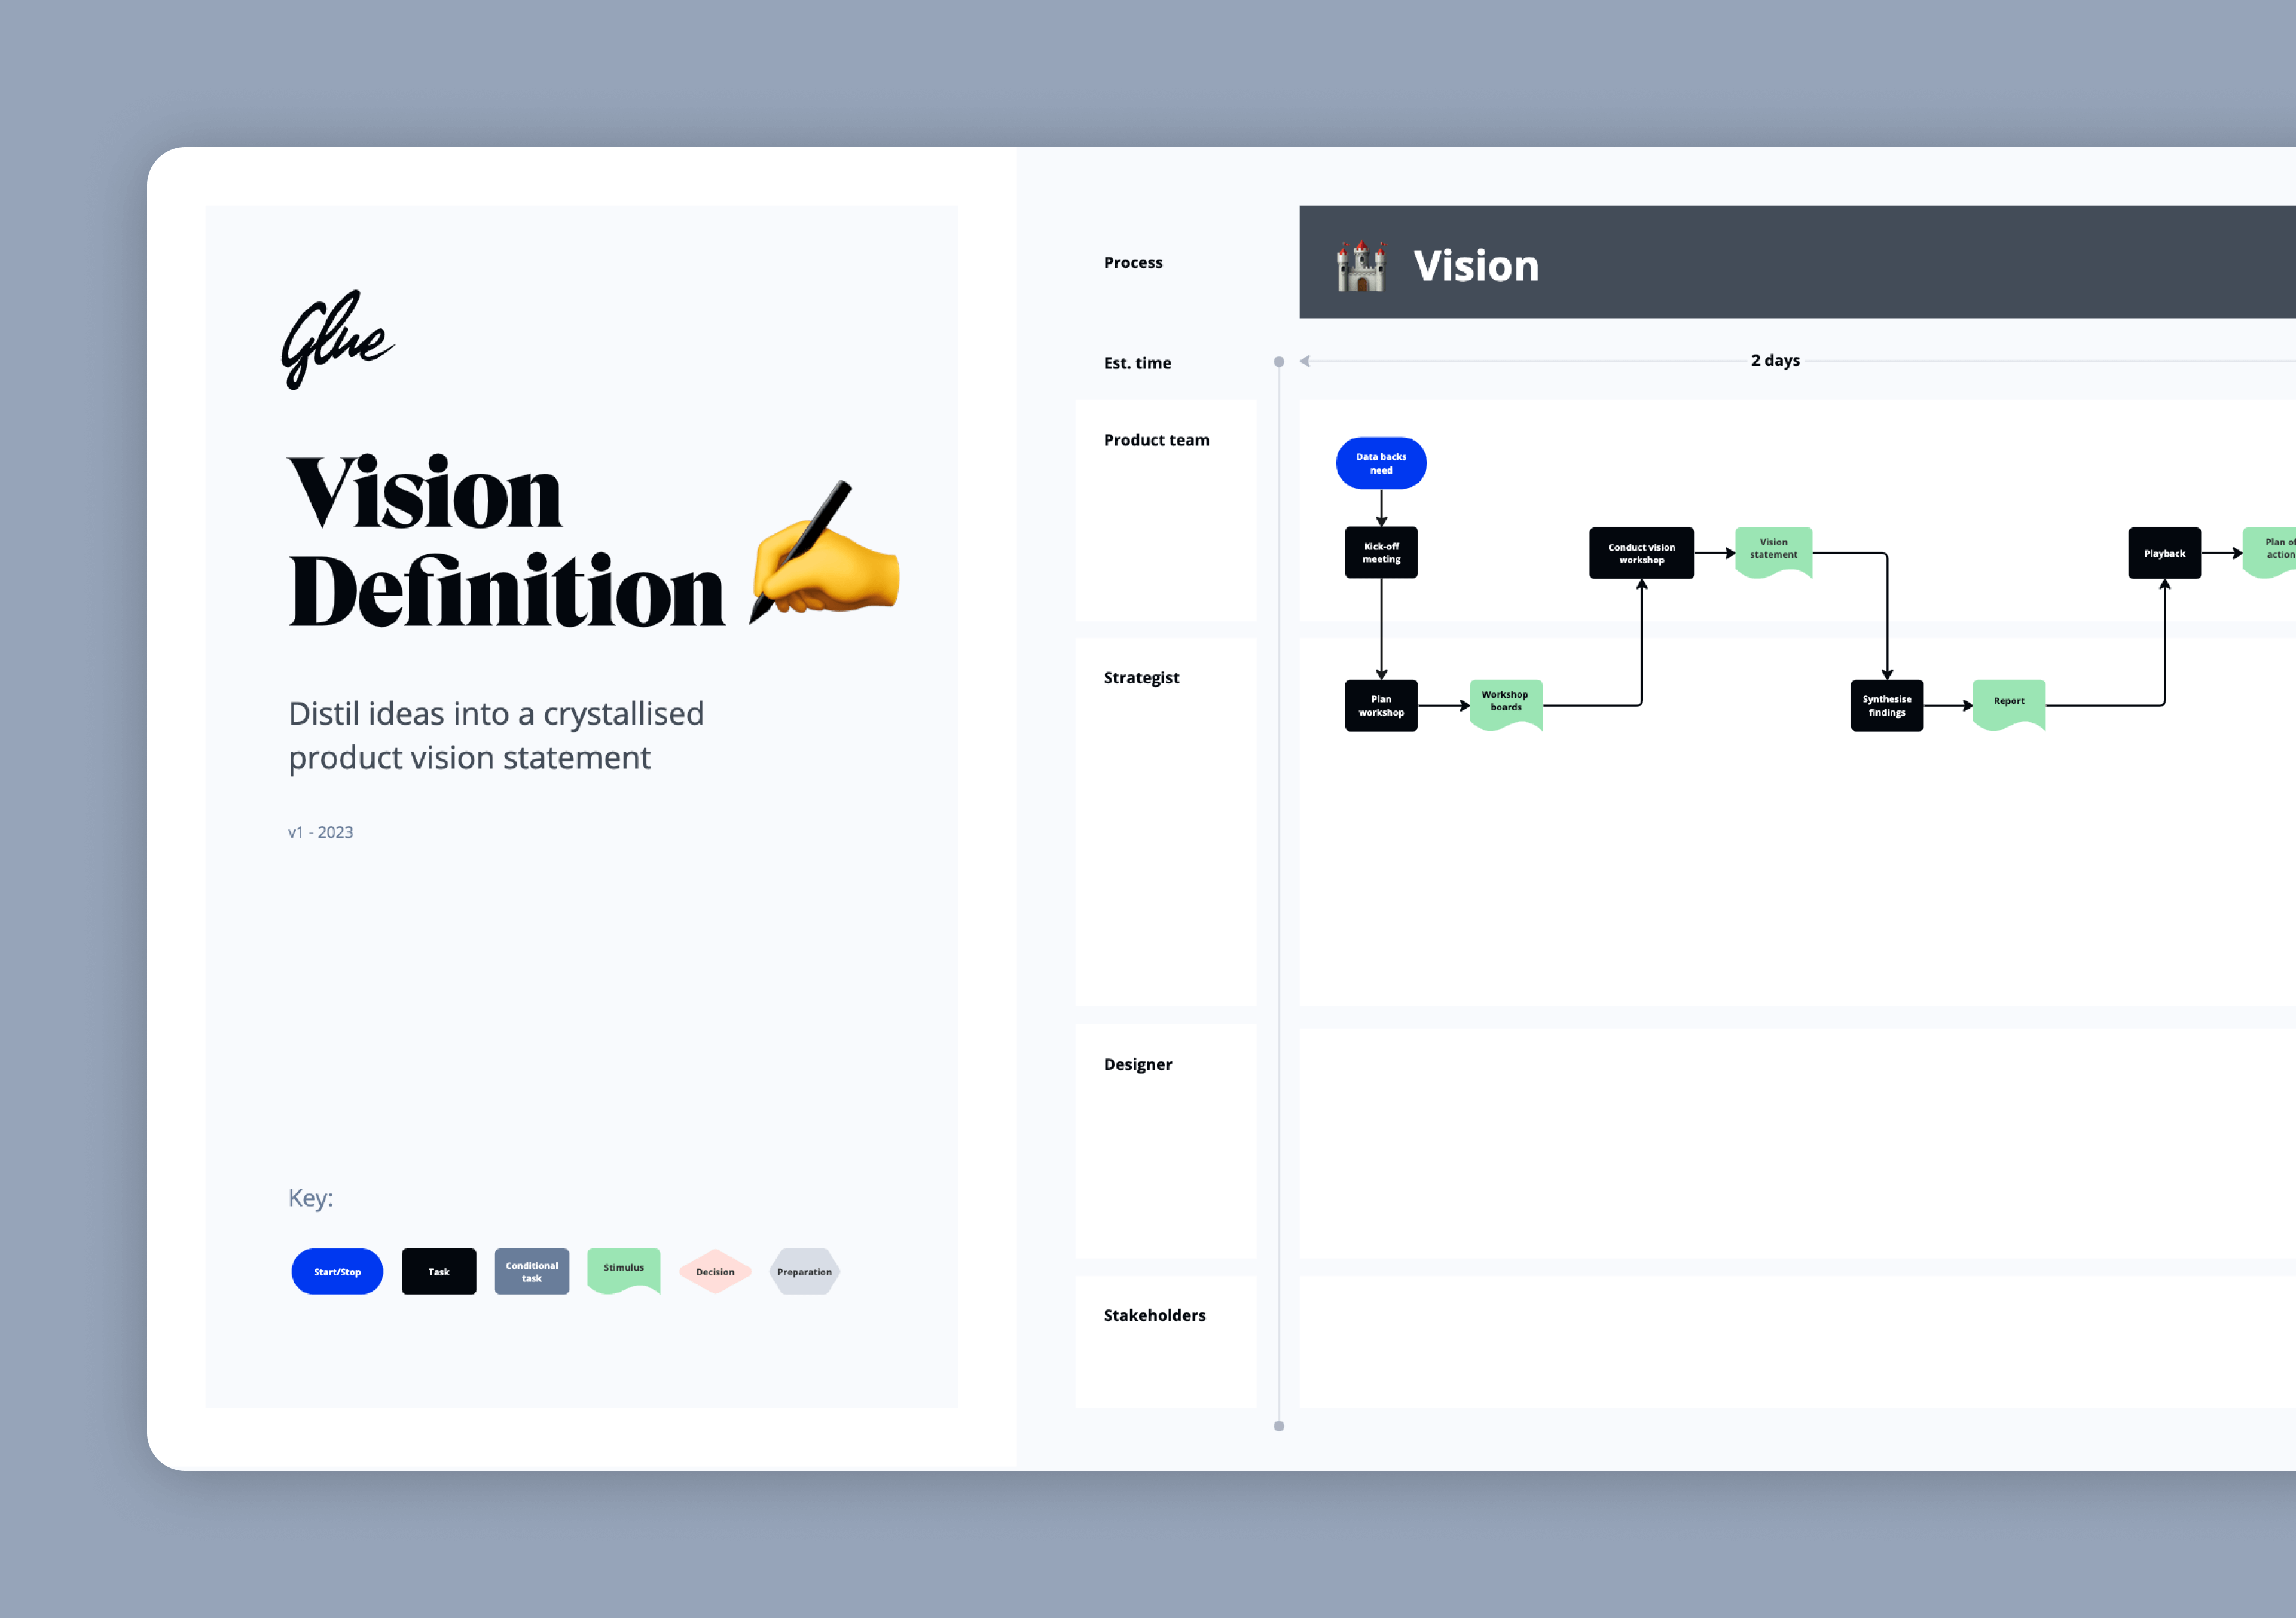 Visualisation of the Glue Product Vision Definition framework workflow followed by the Glue design, strategy and research team to deliver high-end client projects